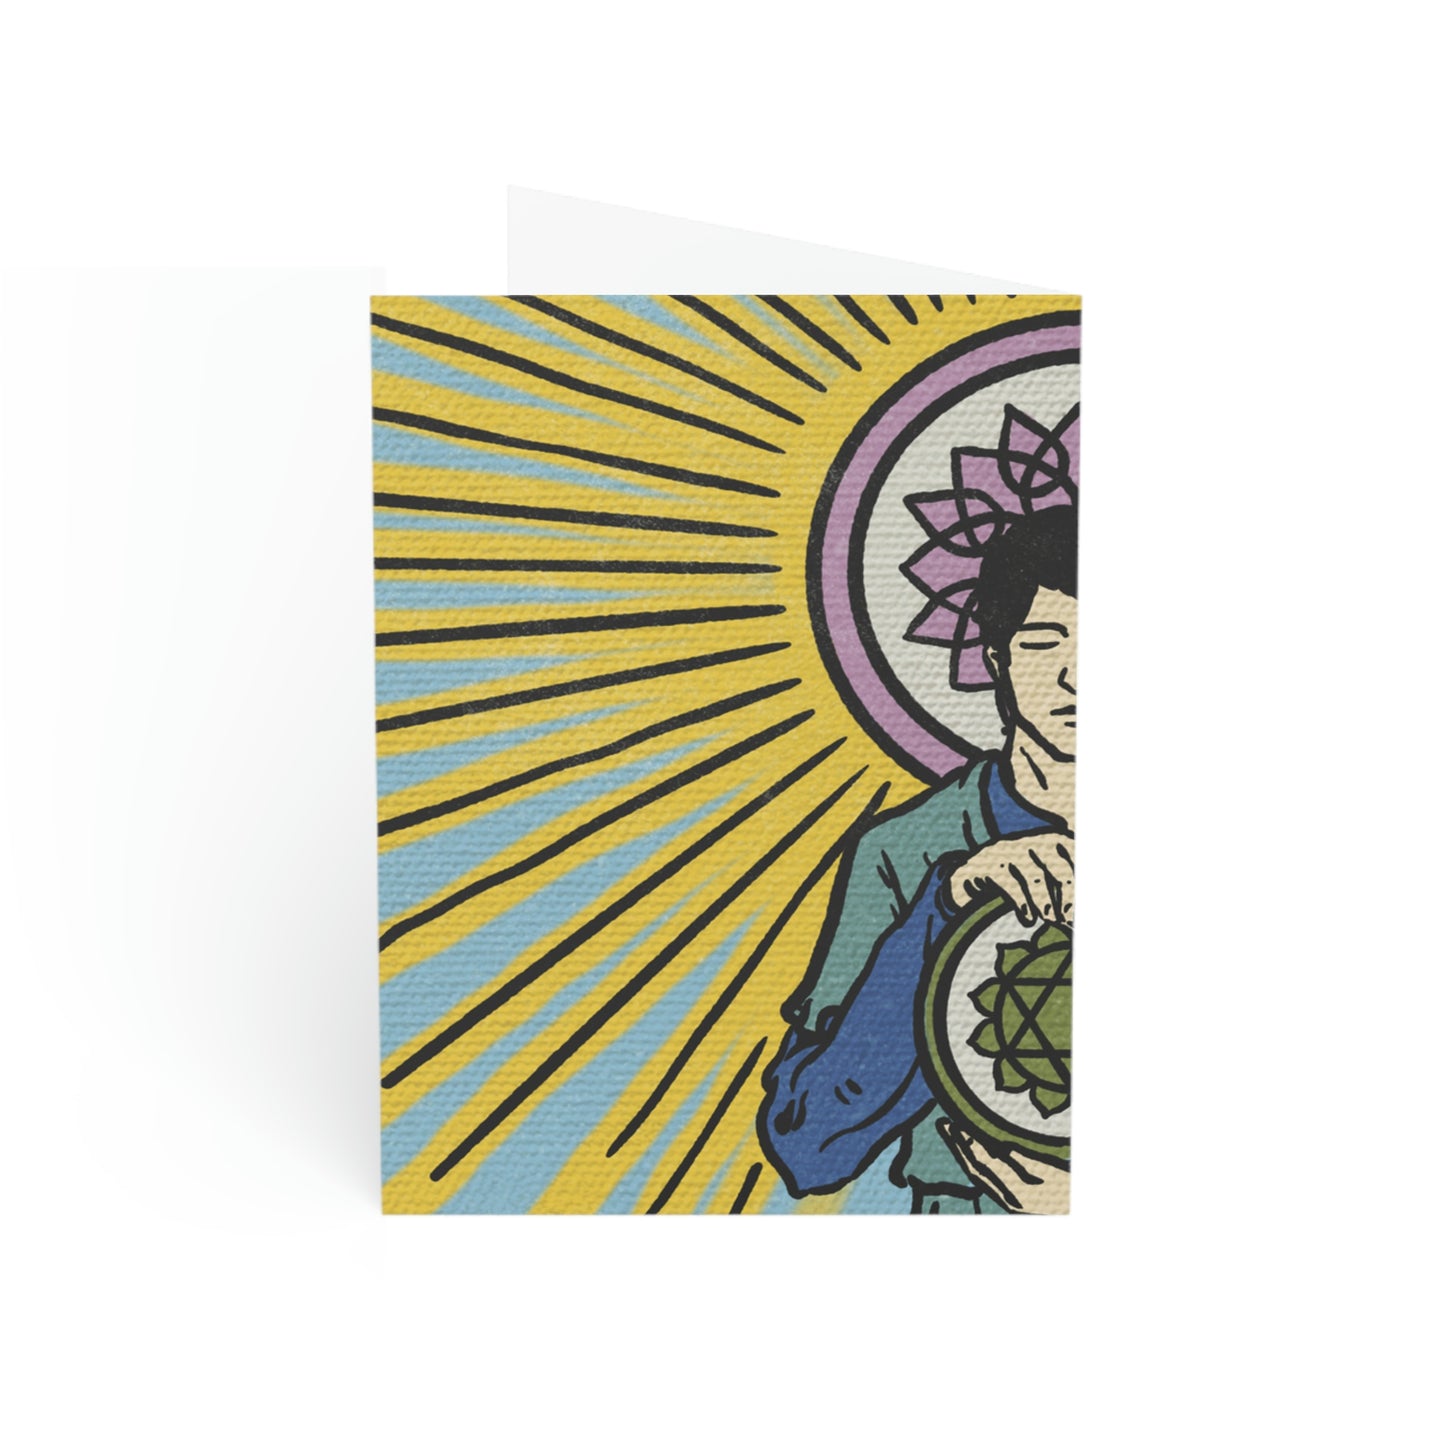 'Four of Pentacles' Chakra Greeting Cards (1, 10, 30, and 50pcs)